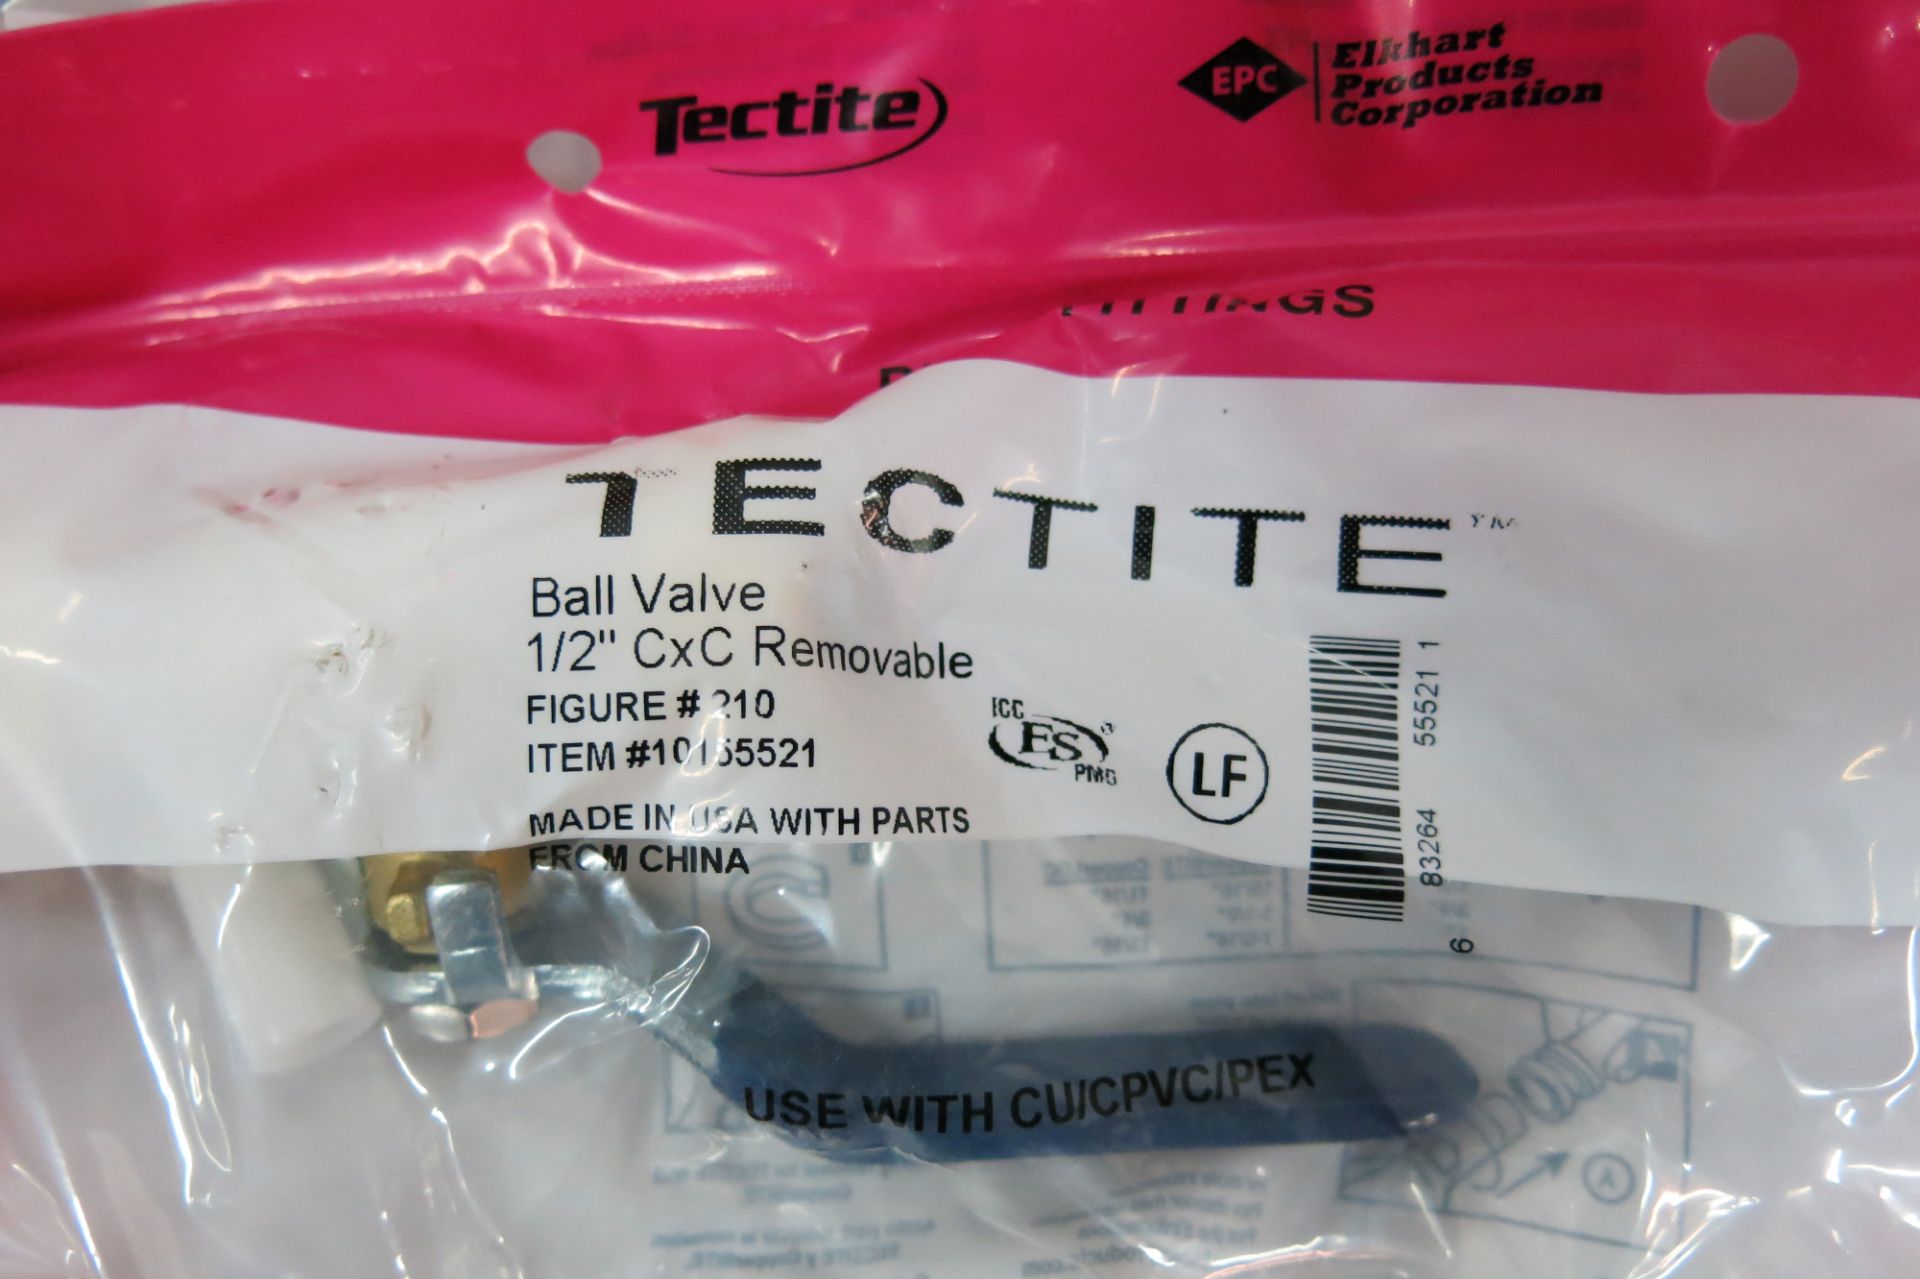 LOT OF TECTITE, 10155521, 1/2", CXC REMOVABLE, BALL VALVES - NEW (LOCATED IN SCARBOROUGH) - Image 2 of 3